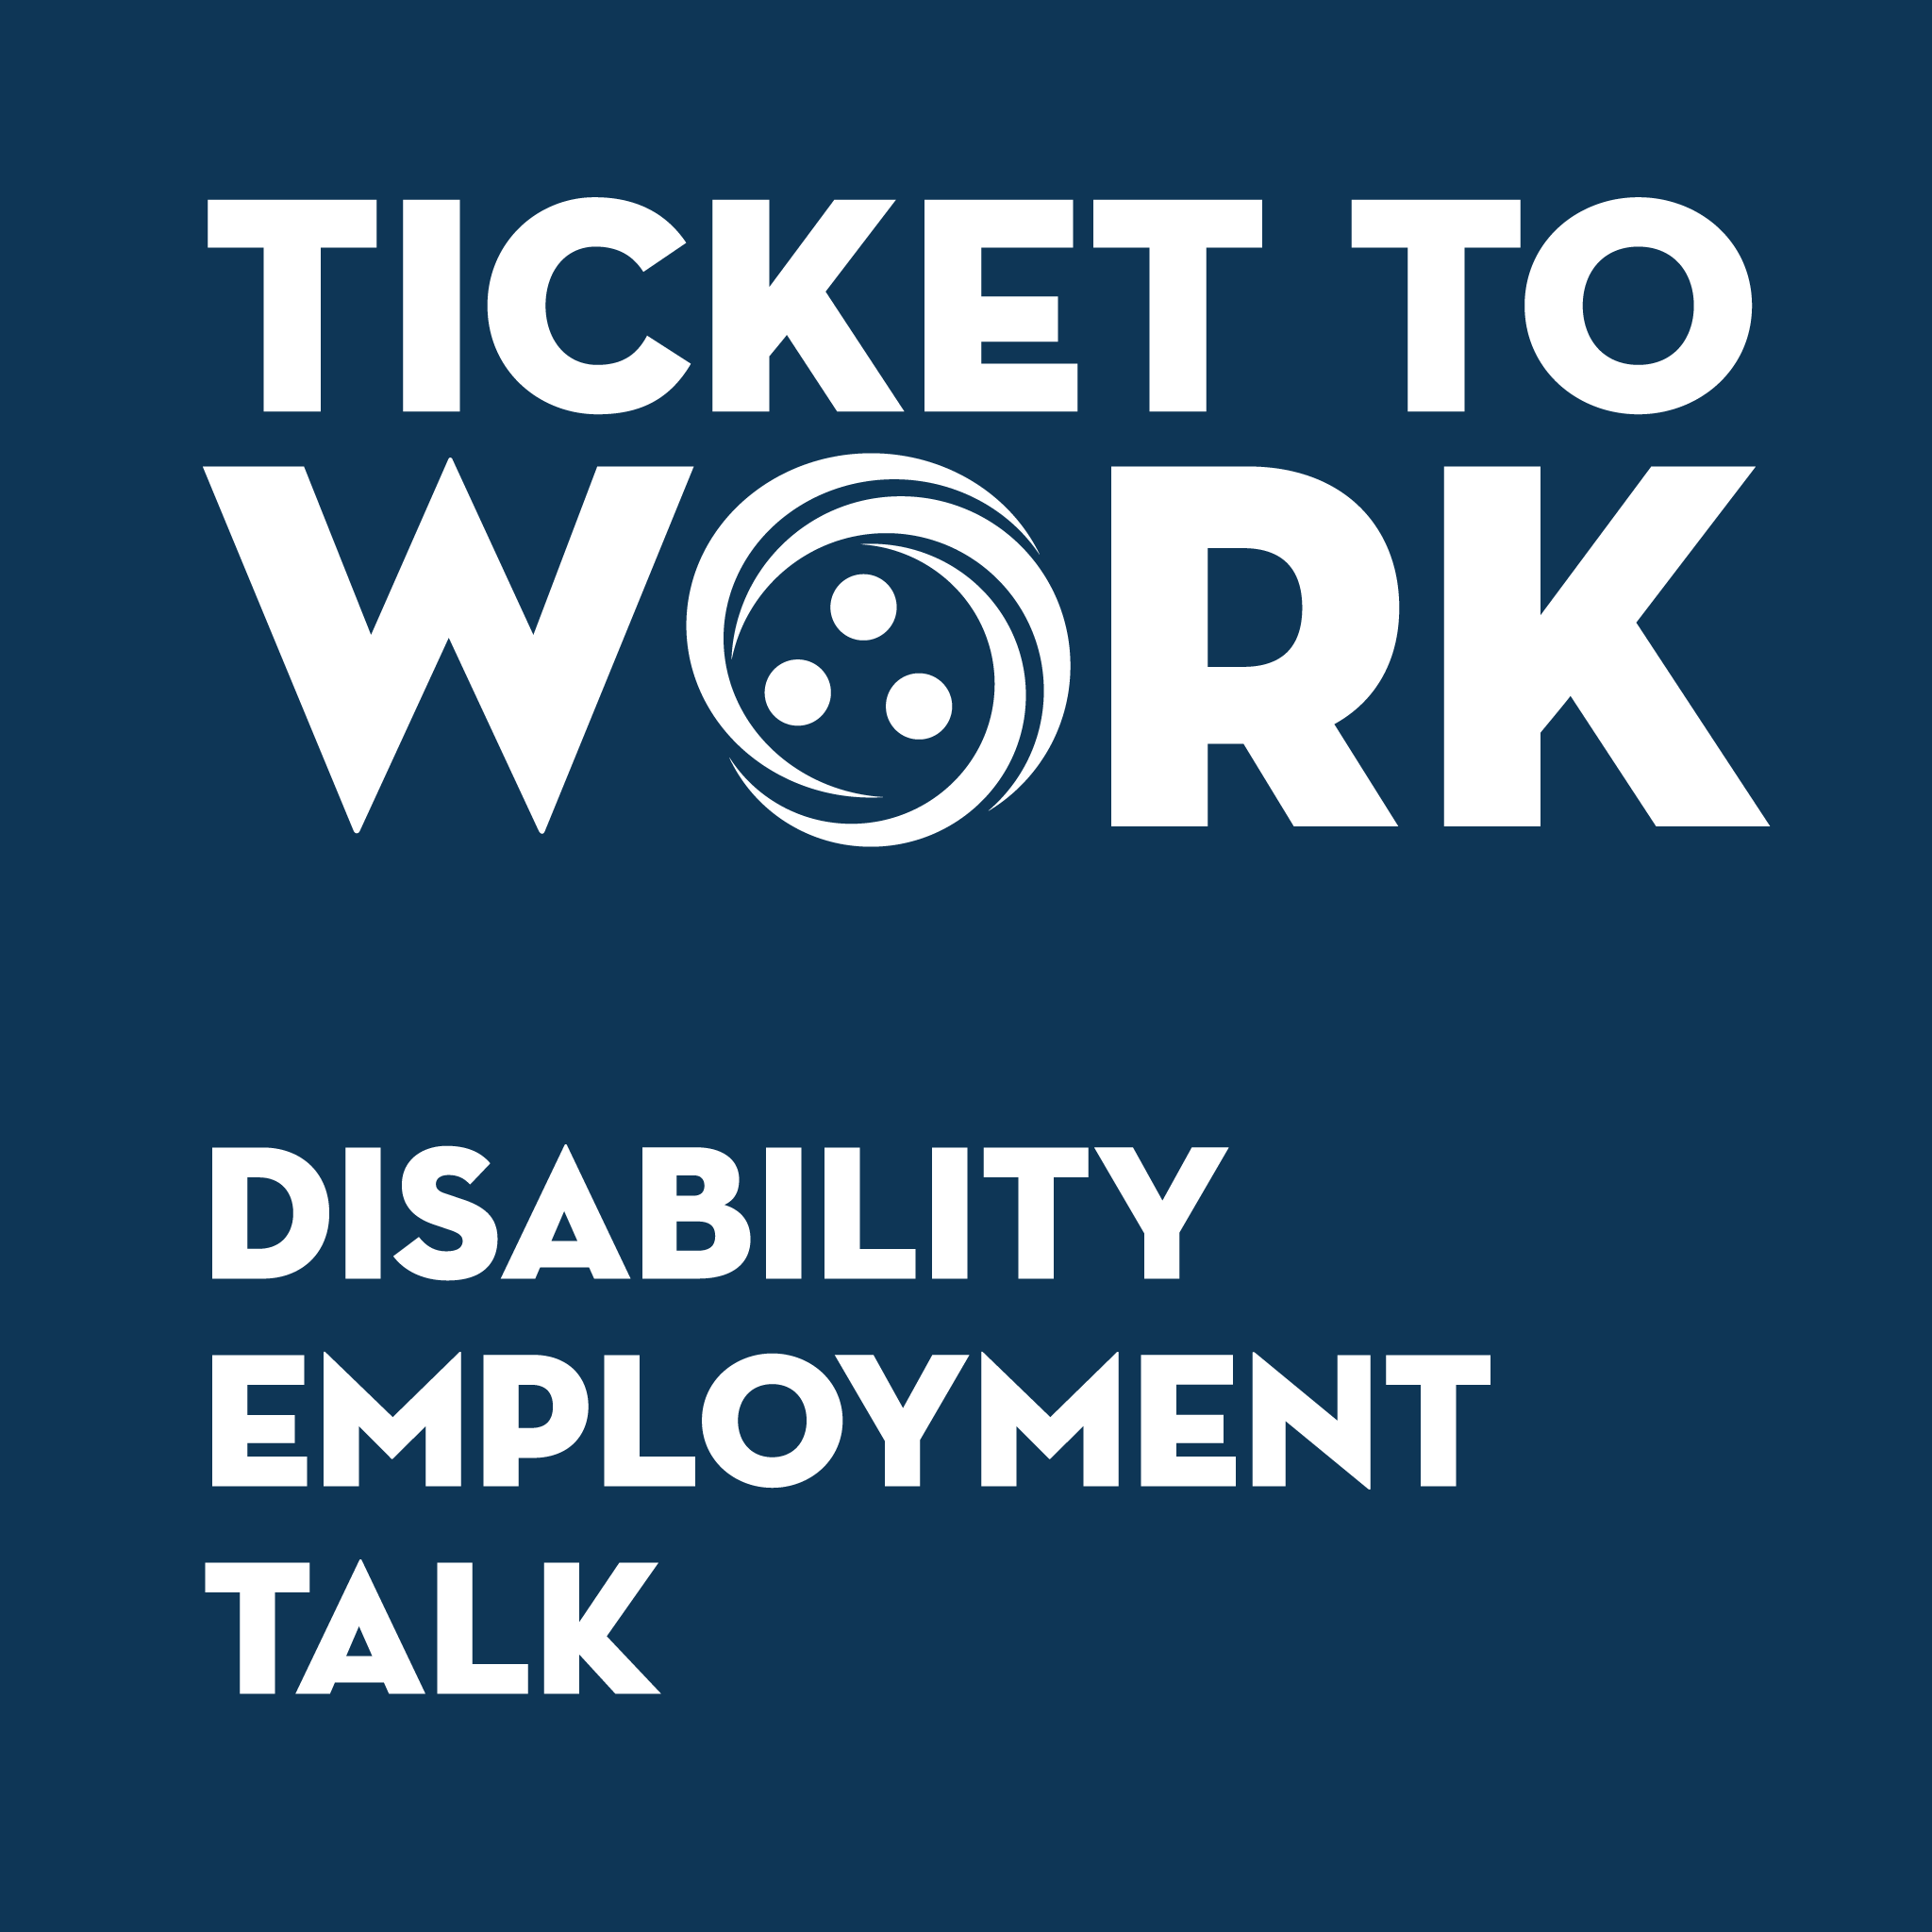 Ticket Talk #4: Catching up with Robert - Ticket to Work - Social Security